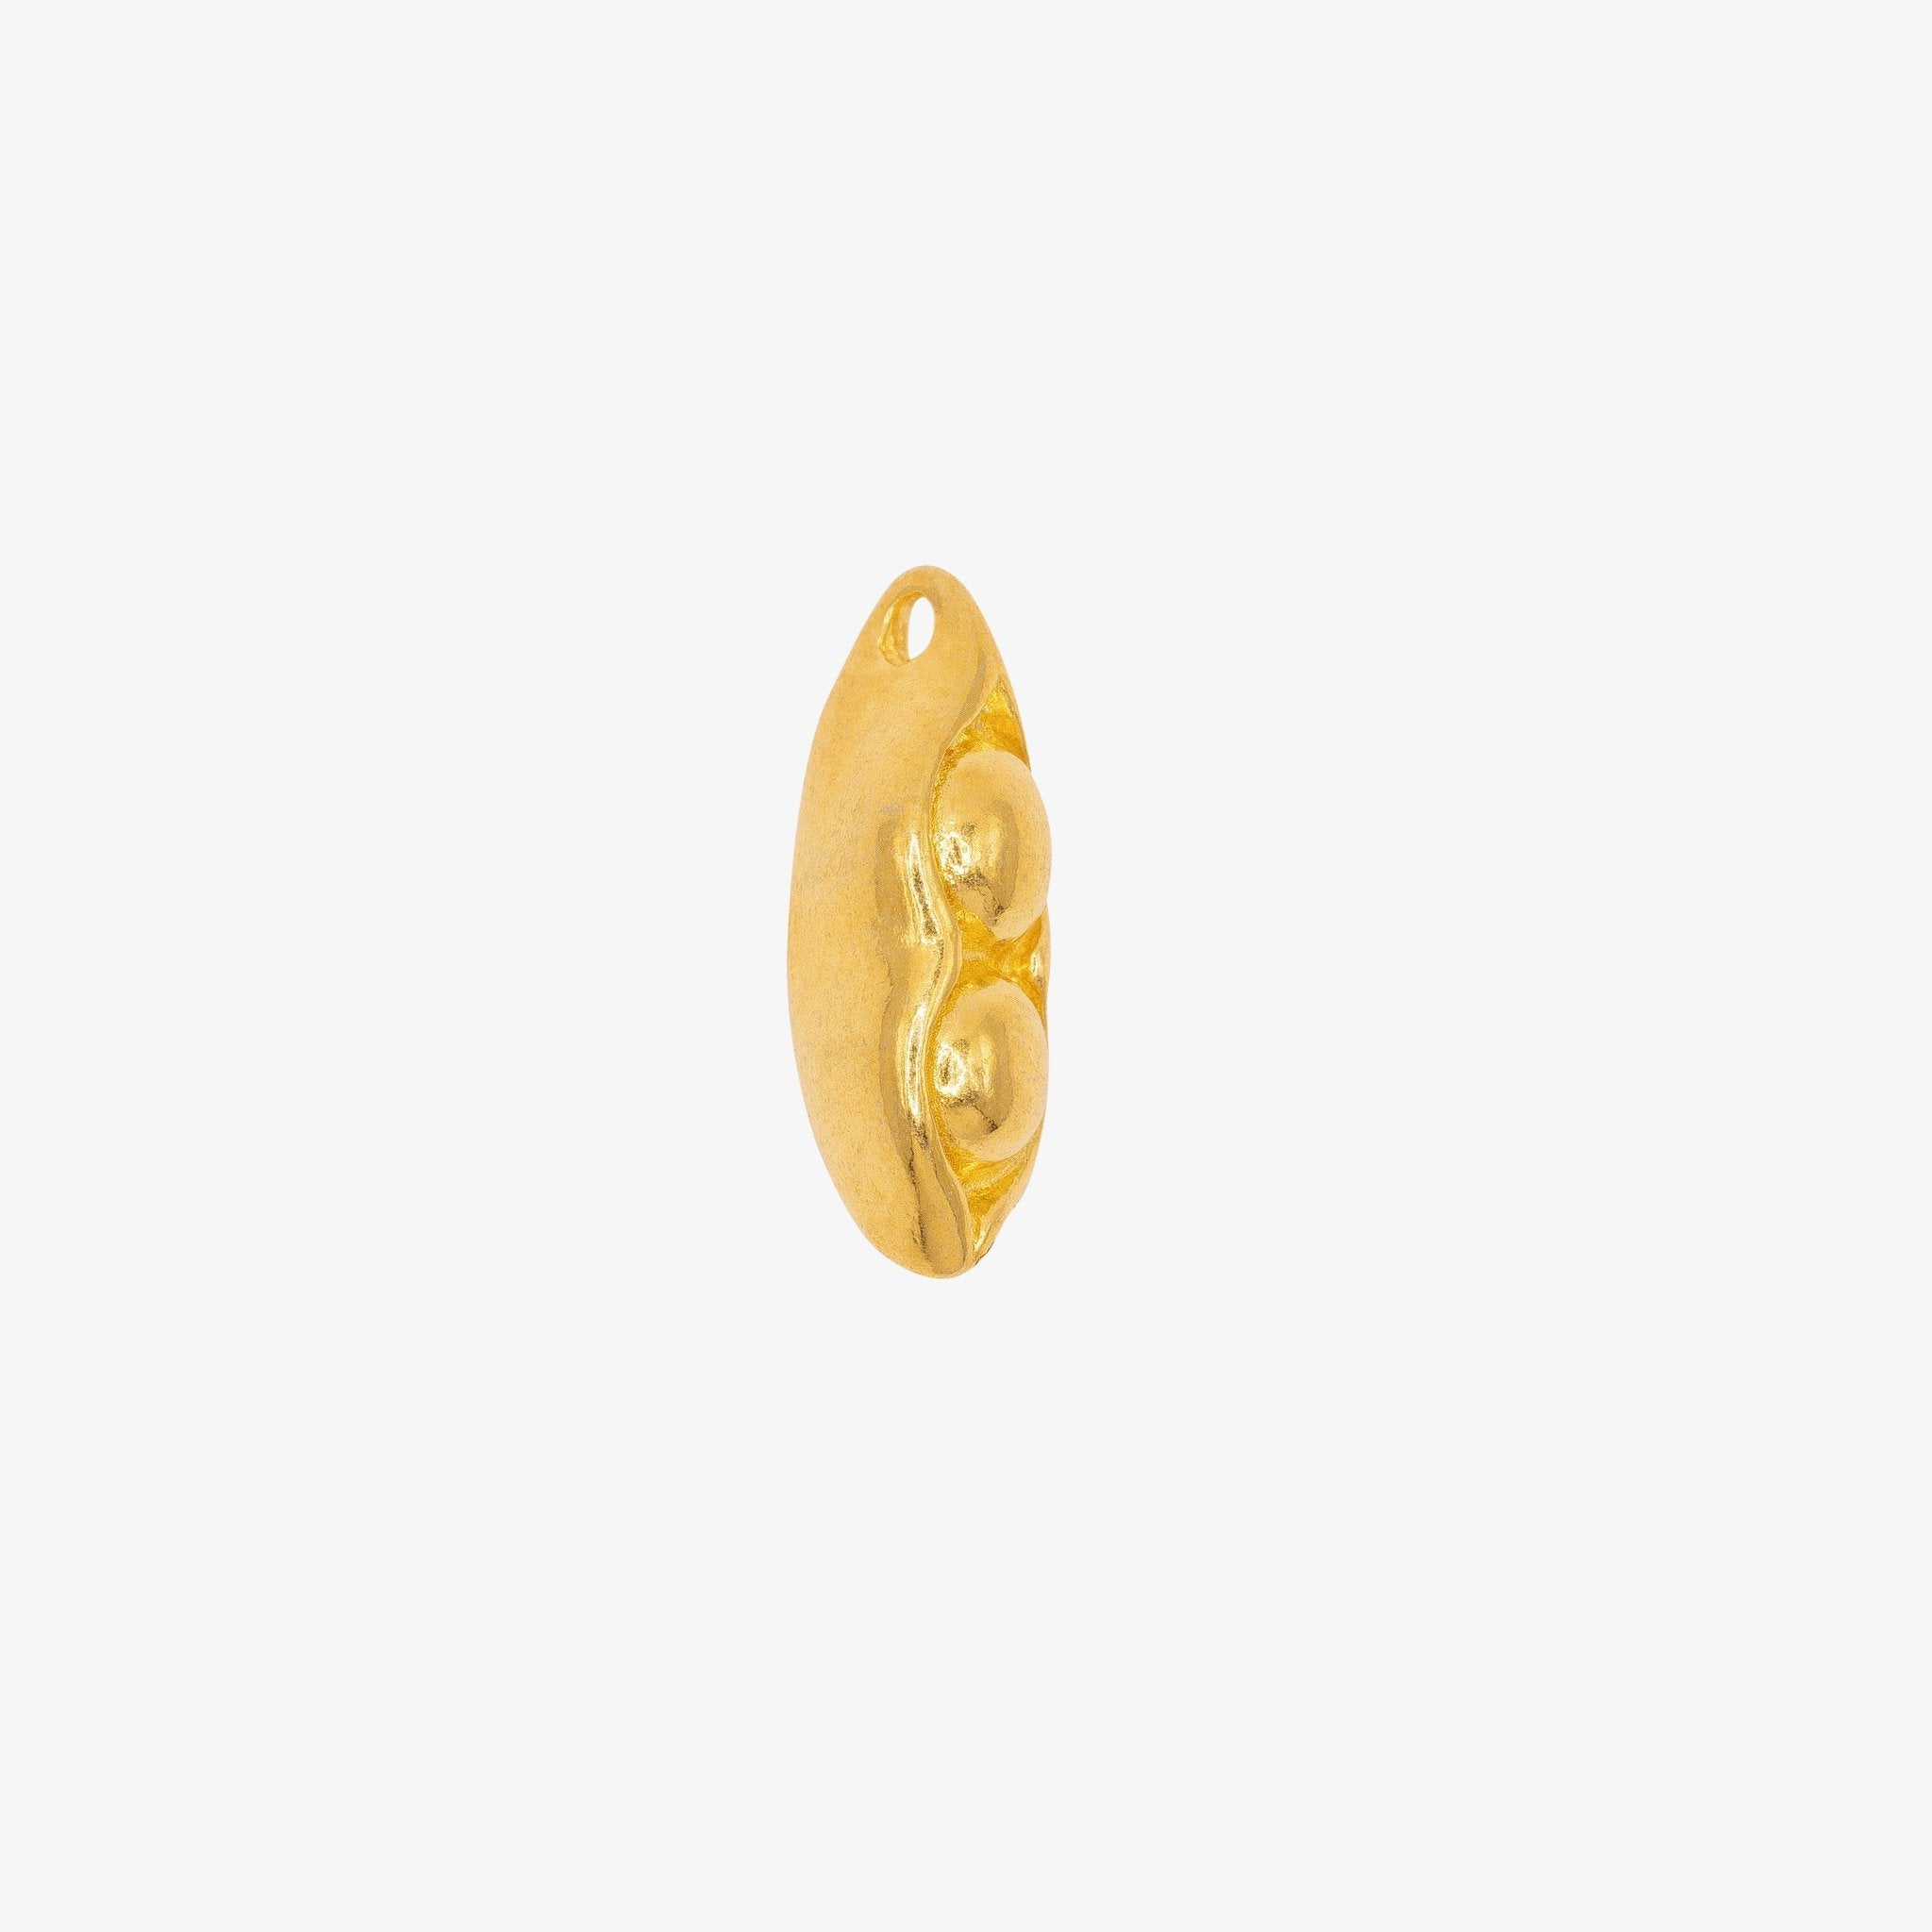 Two Peas in a Pod Charm 14K Gold - GoldandWillow